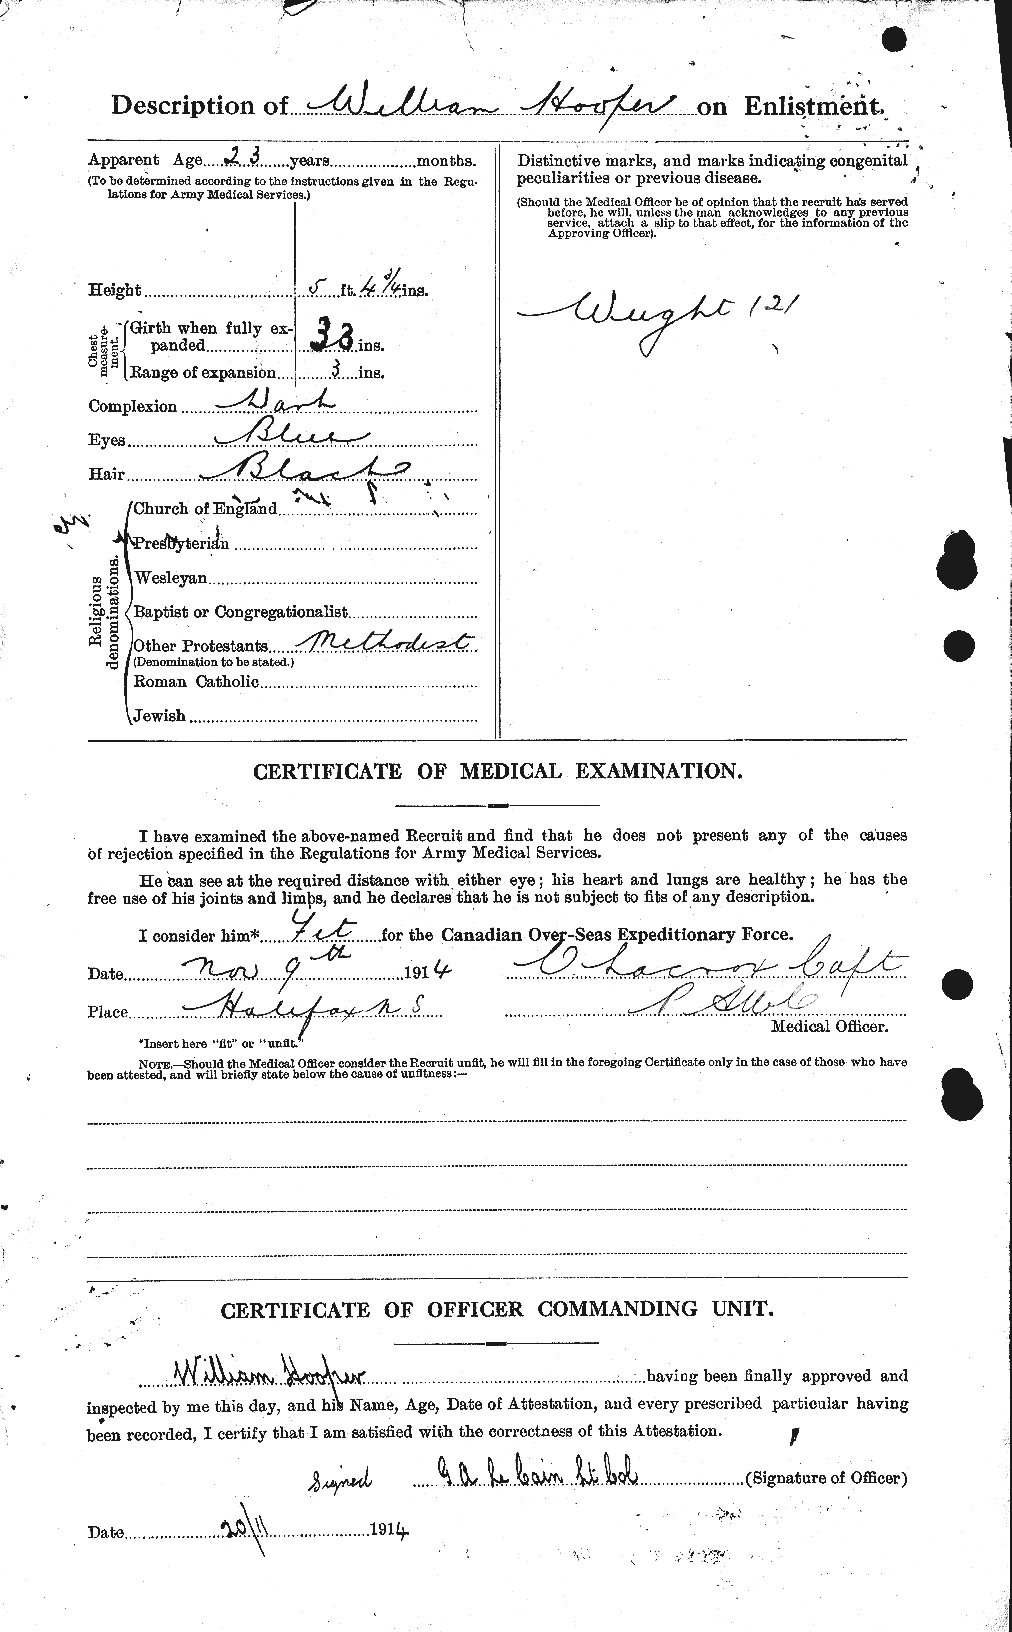 Personnel Records of the First World War - CEF 399219b